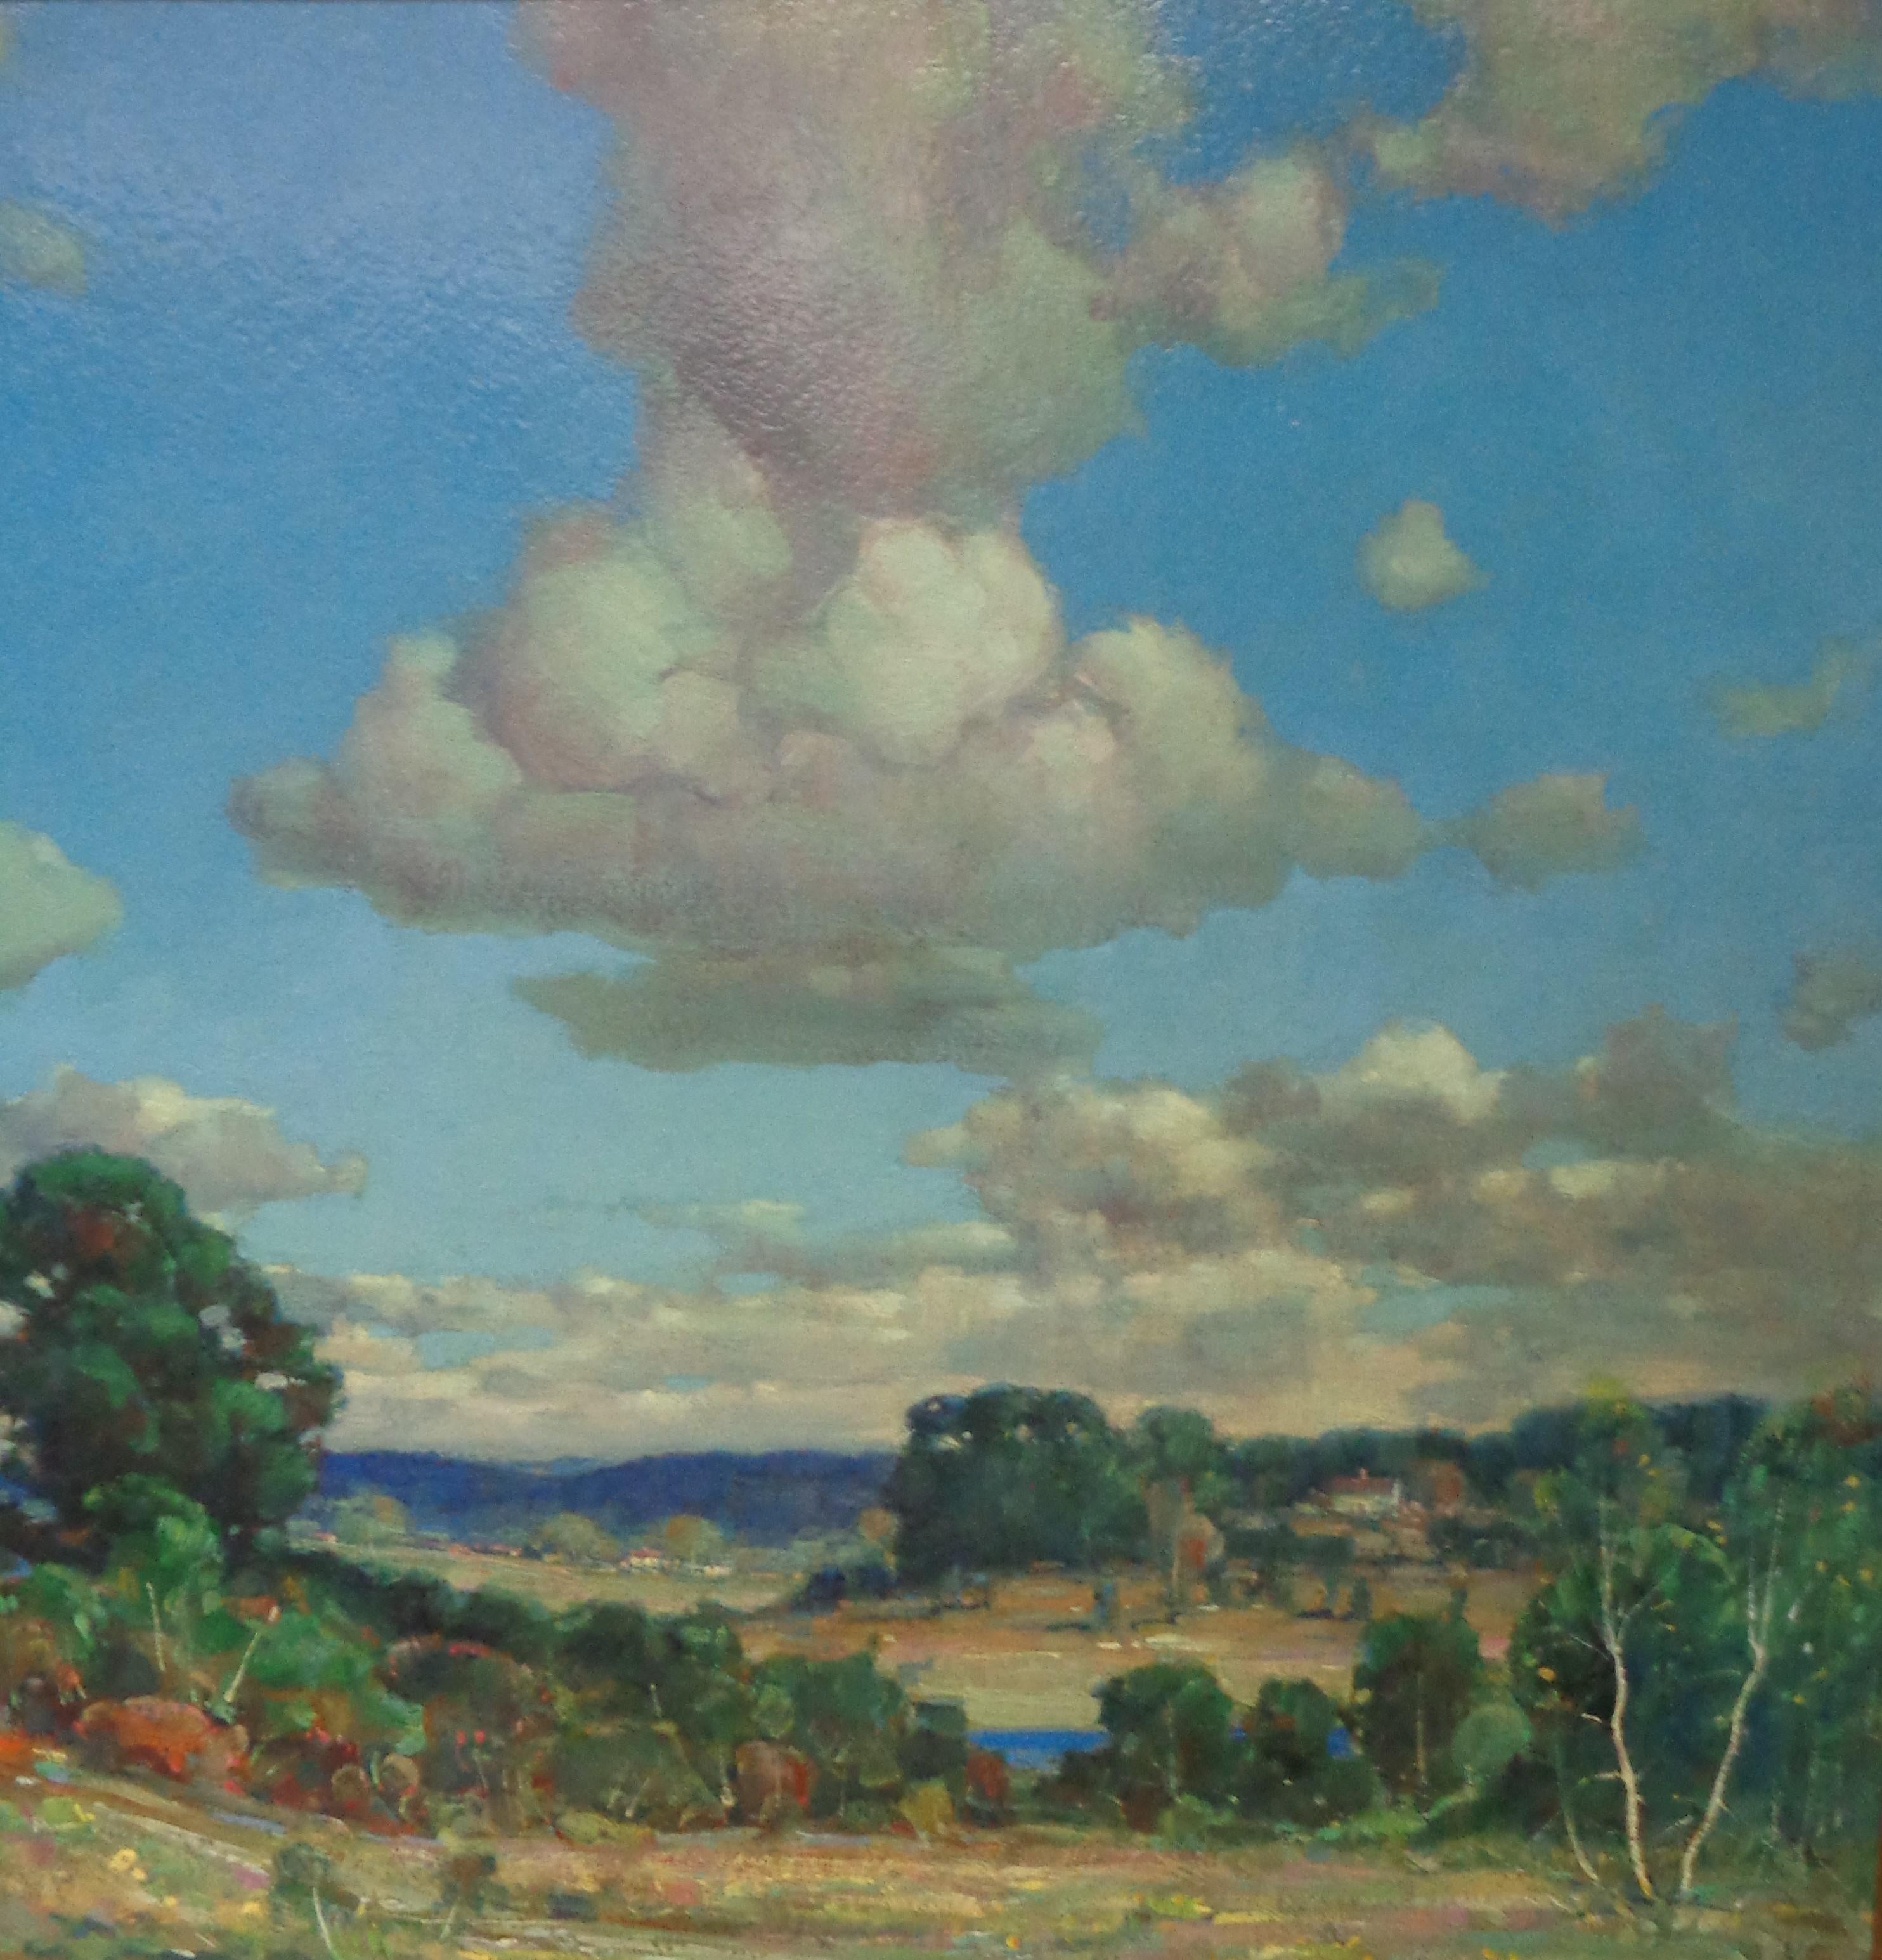 Frederick Mortimer Lamb was an American painter who was born in 1861. The artist died in 1936.

The Painting
A beautiful landscape featuring wonderful clouds in what looks like an original frame, possibly arts and crafts, but slightly warped and